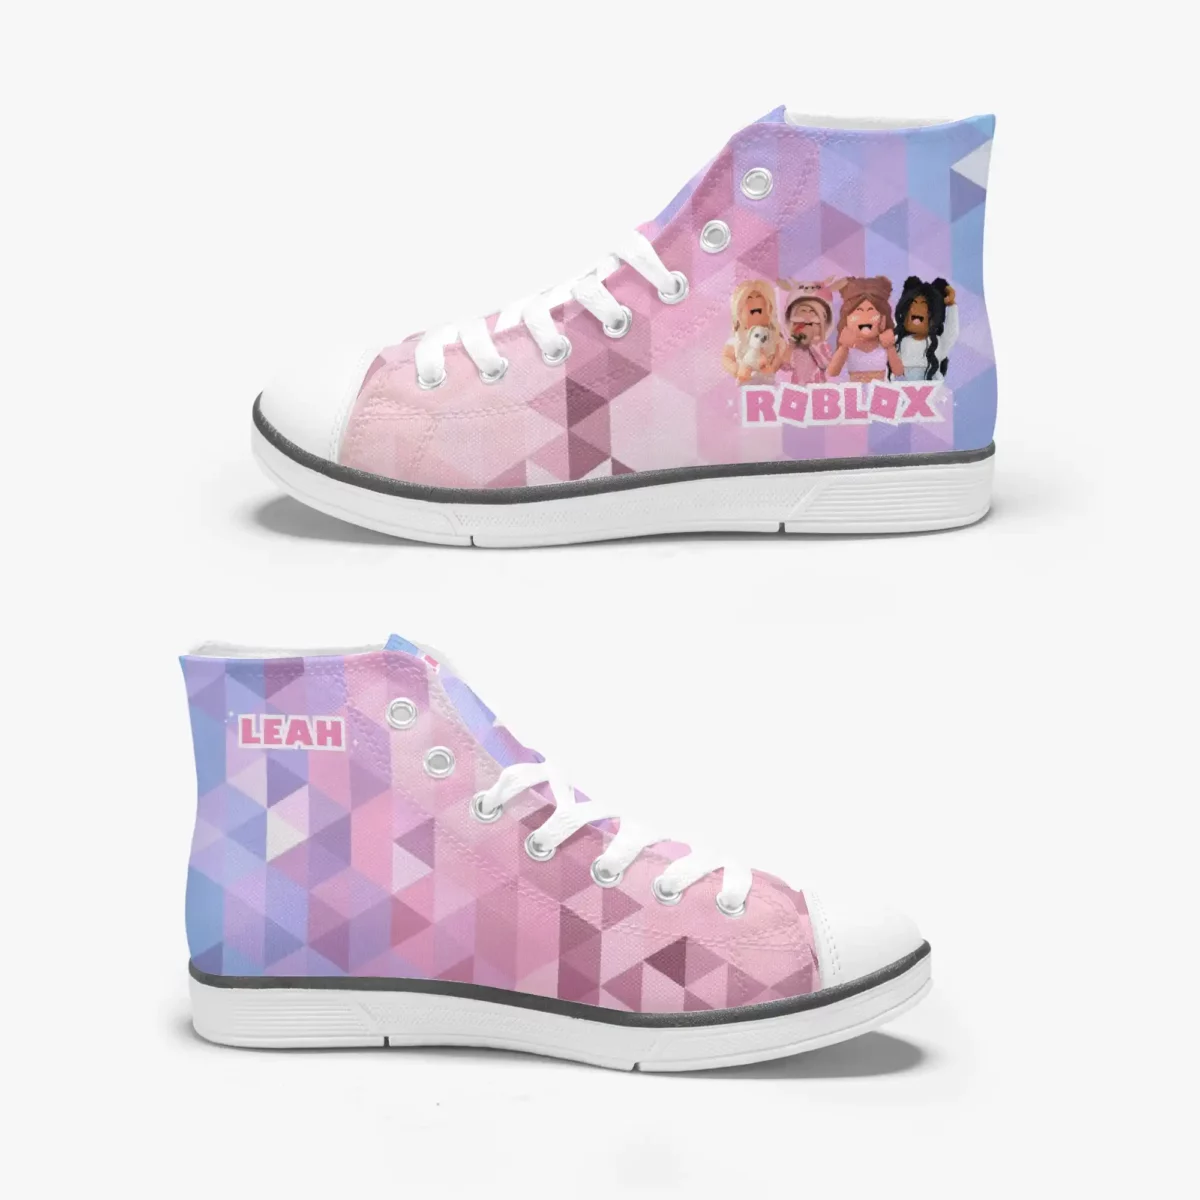 Roblox Girls Personalized High-Top Sneakers for Children – Pink and Purple geometric background Cool Kiddo 18